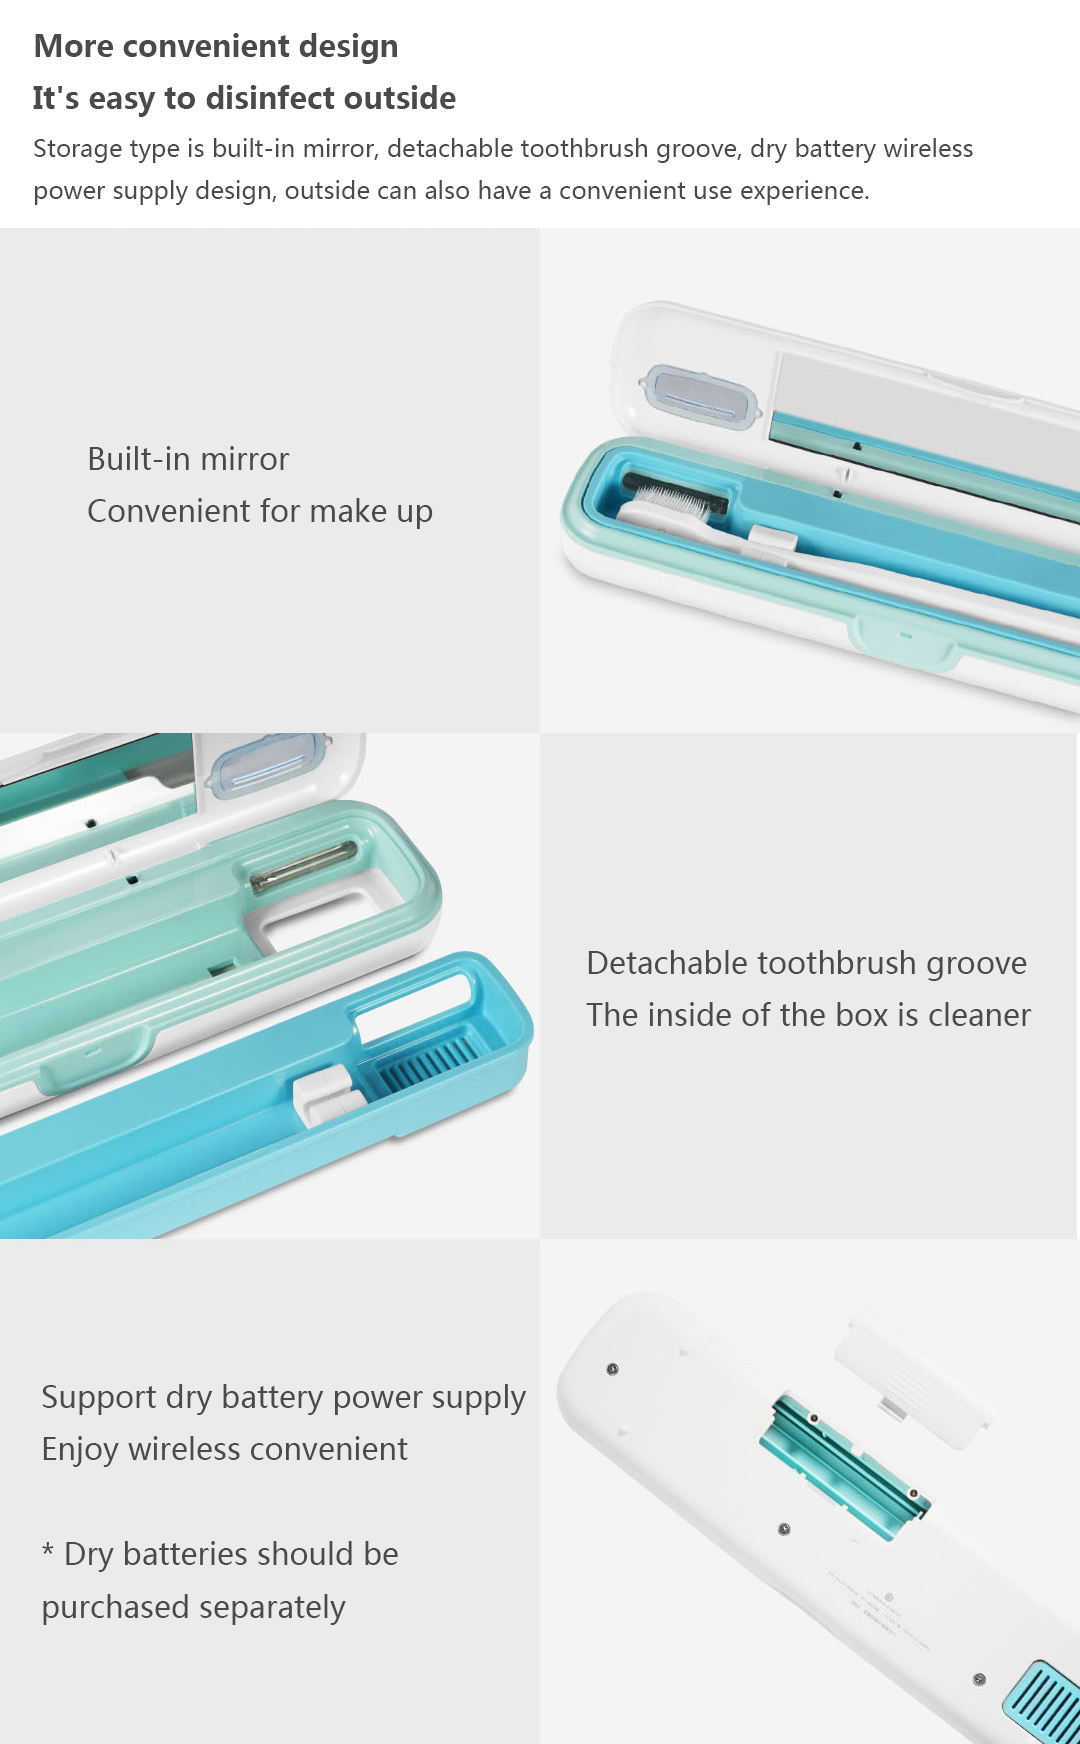 Smartda-UVC-Toothbrush-Sterilizer-Portable-Toothbrush-Timing-Disinfection-Storage-Box-from-1691841-8